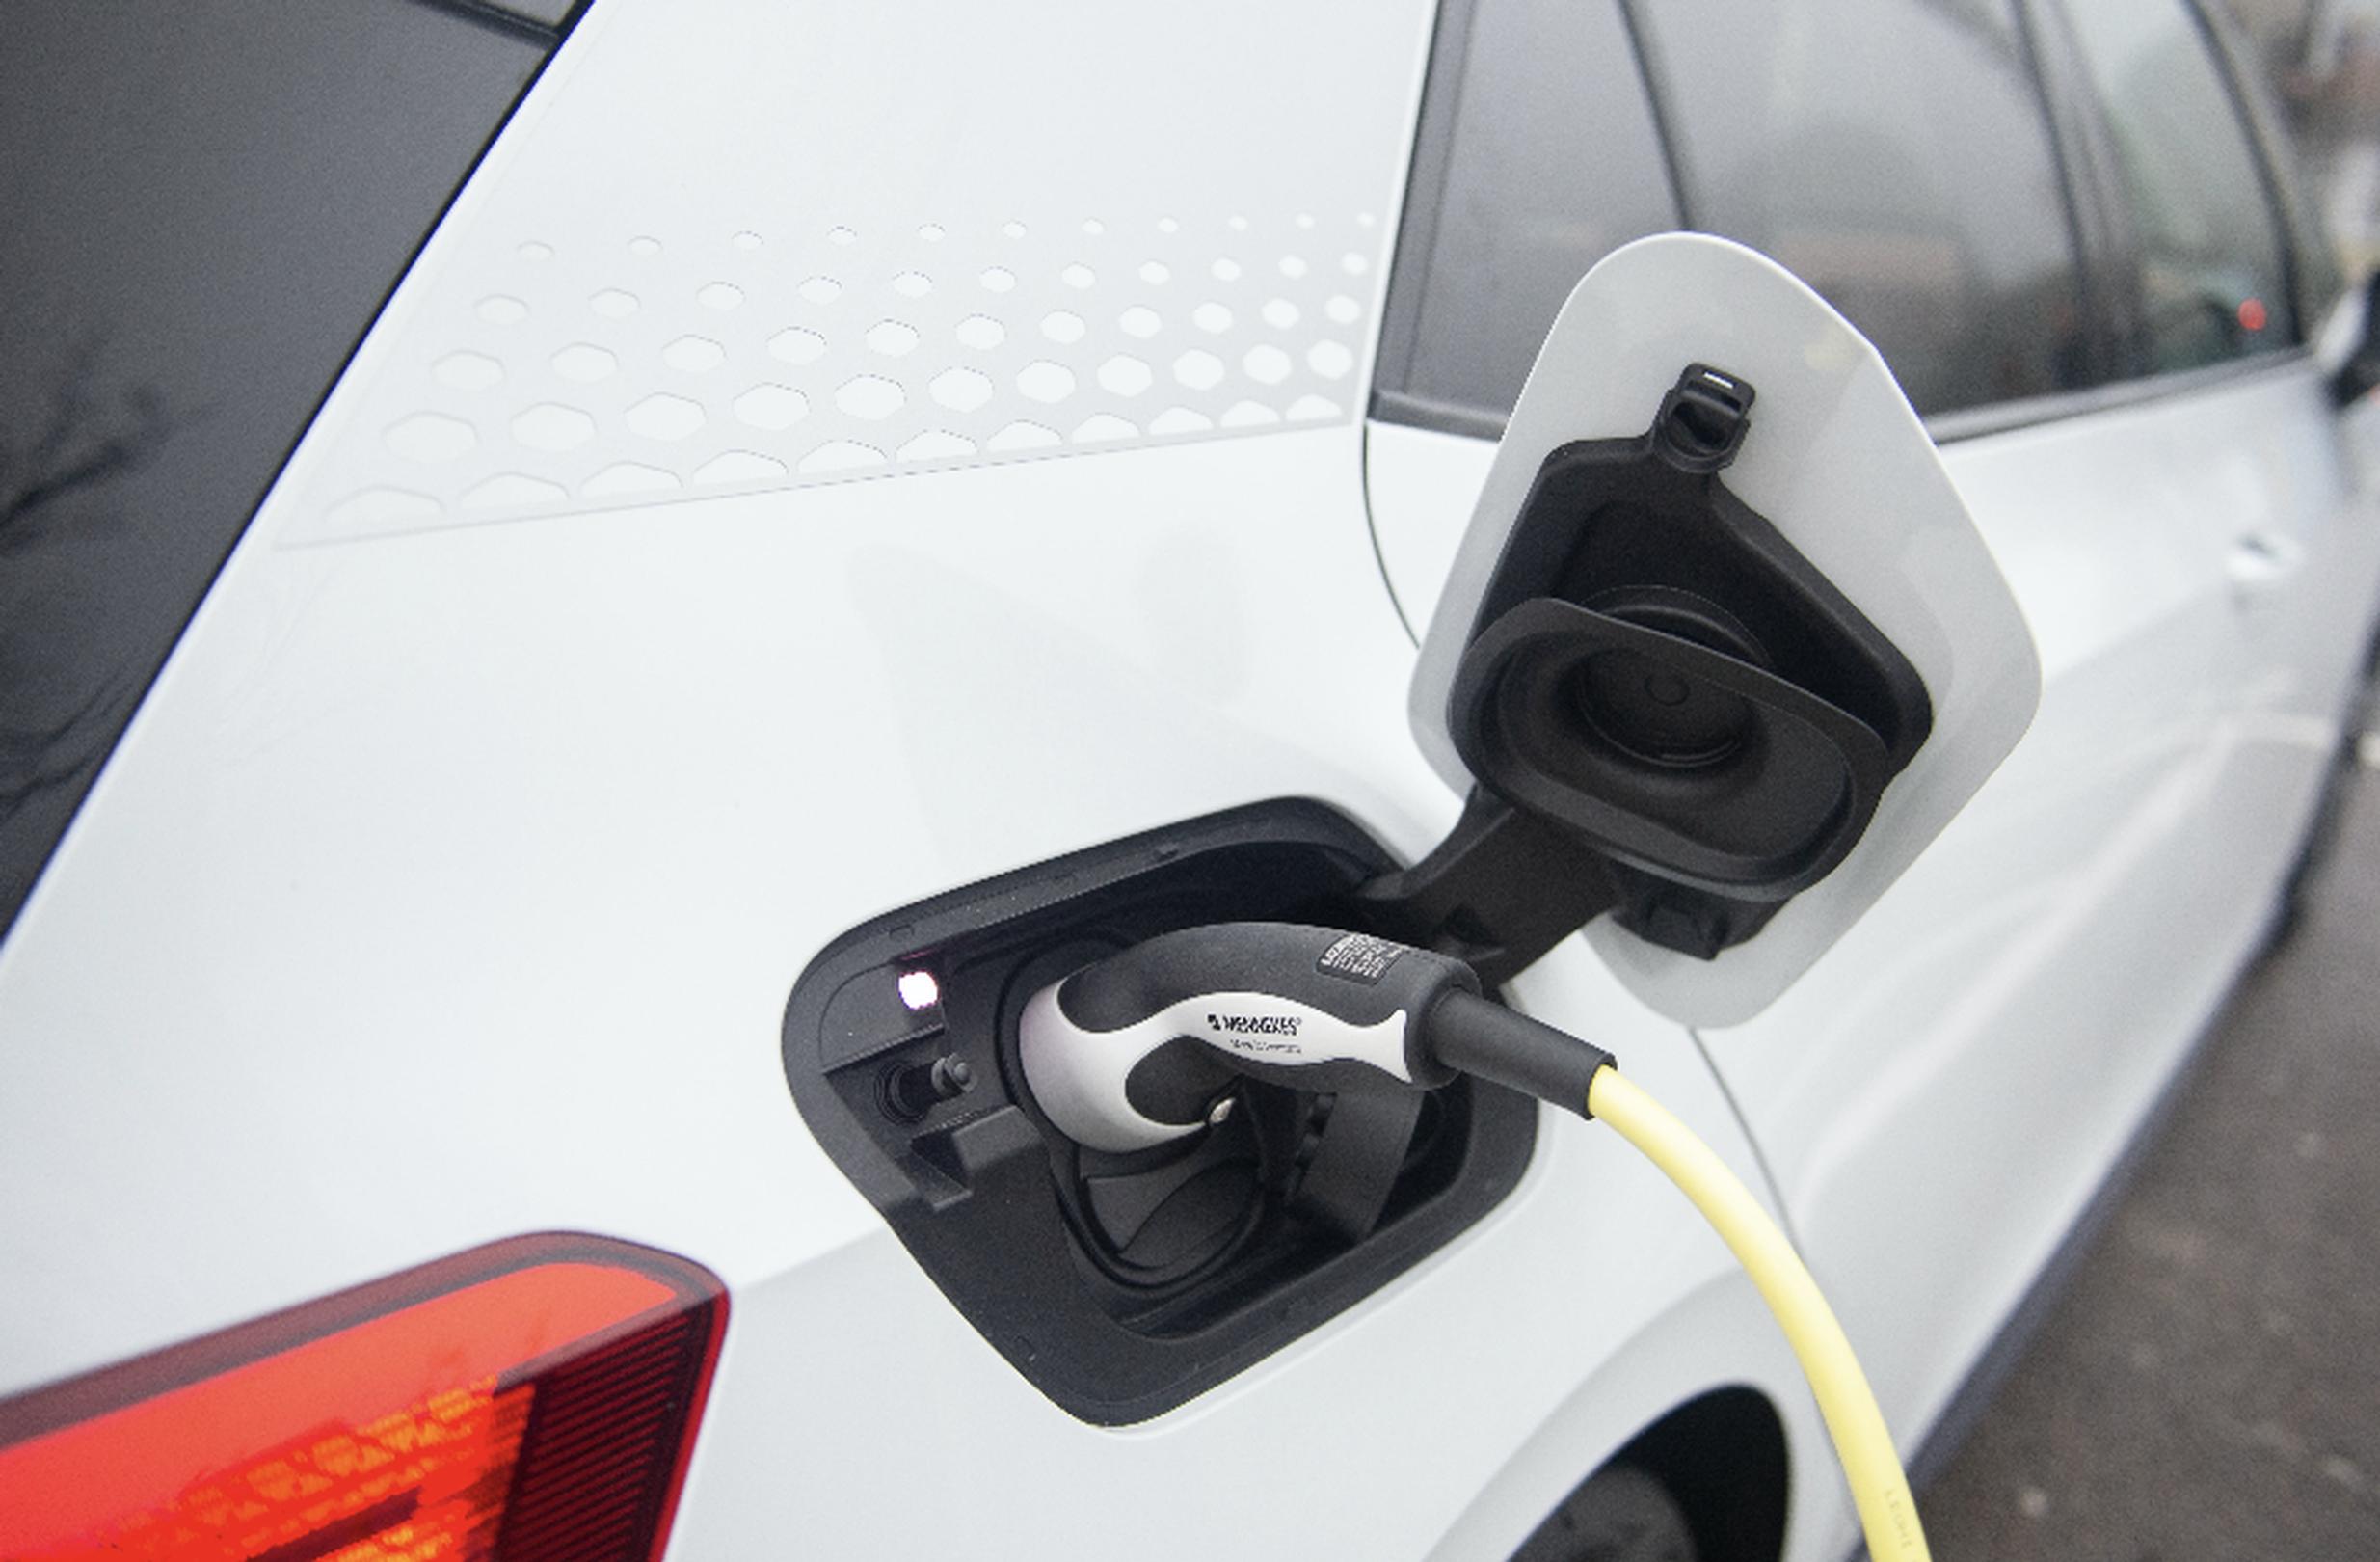 Chargepoint roll out must keep pace with growing demands or risk stalling EV take-up momentum